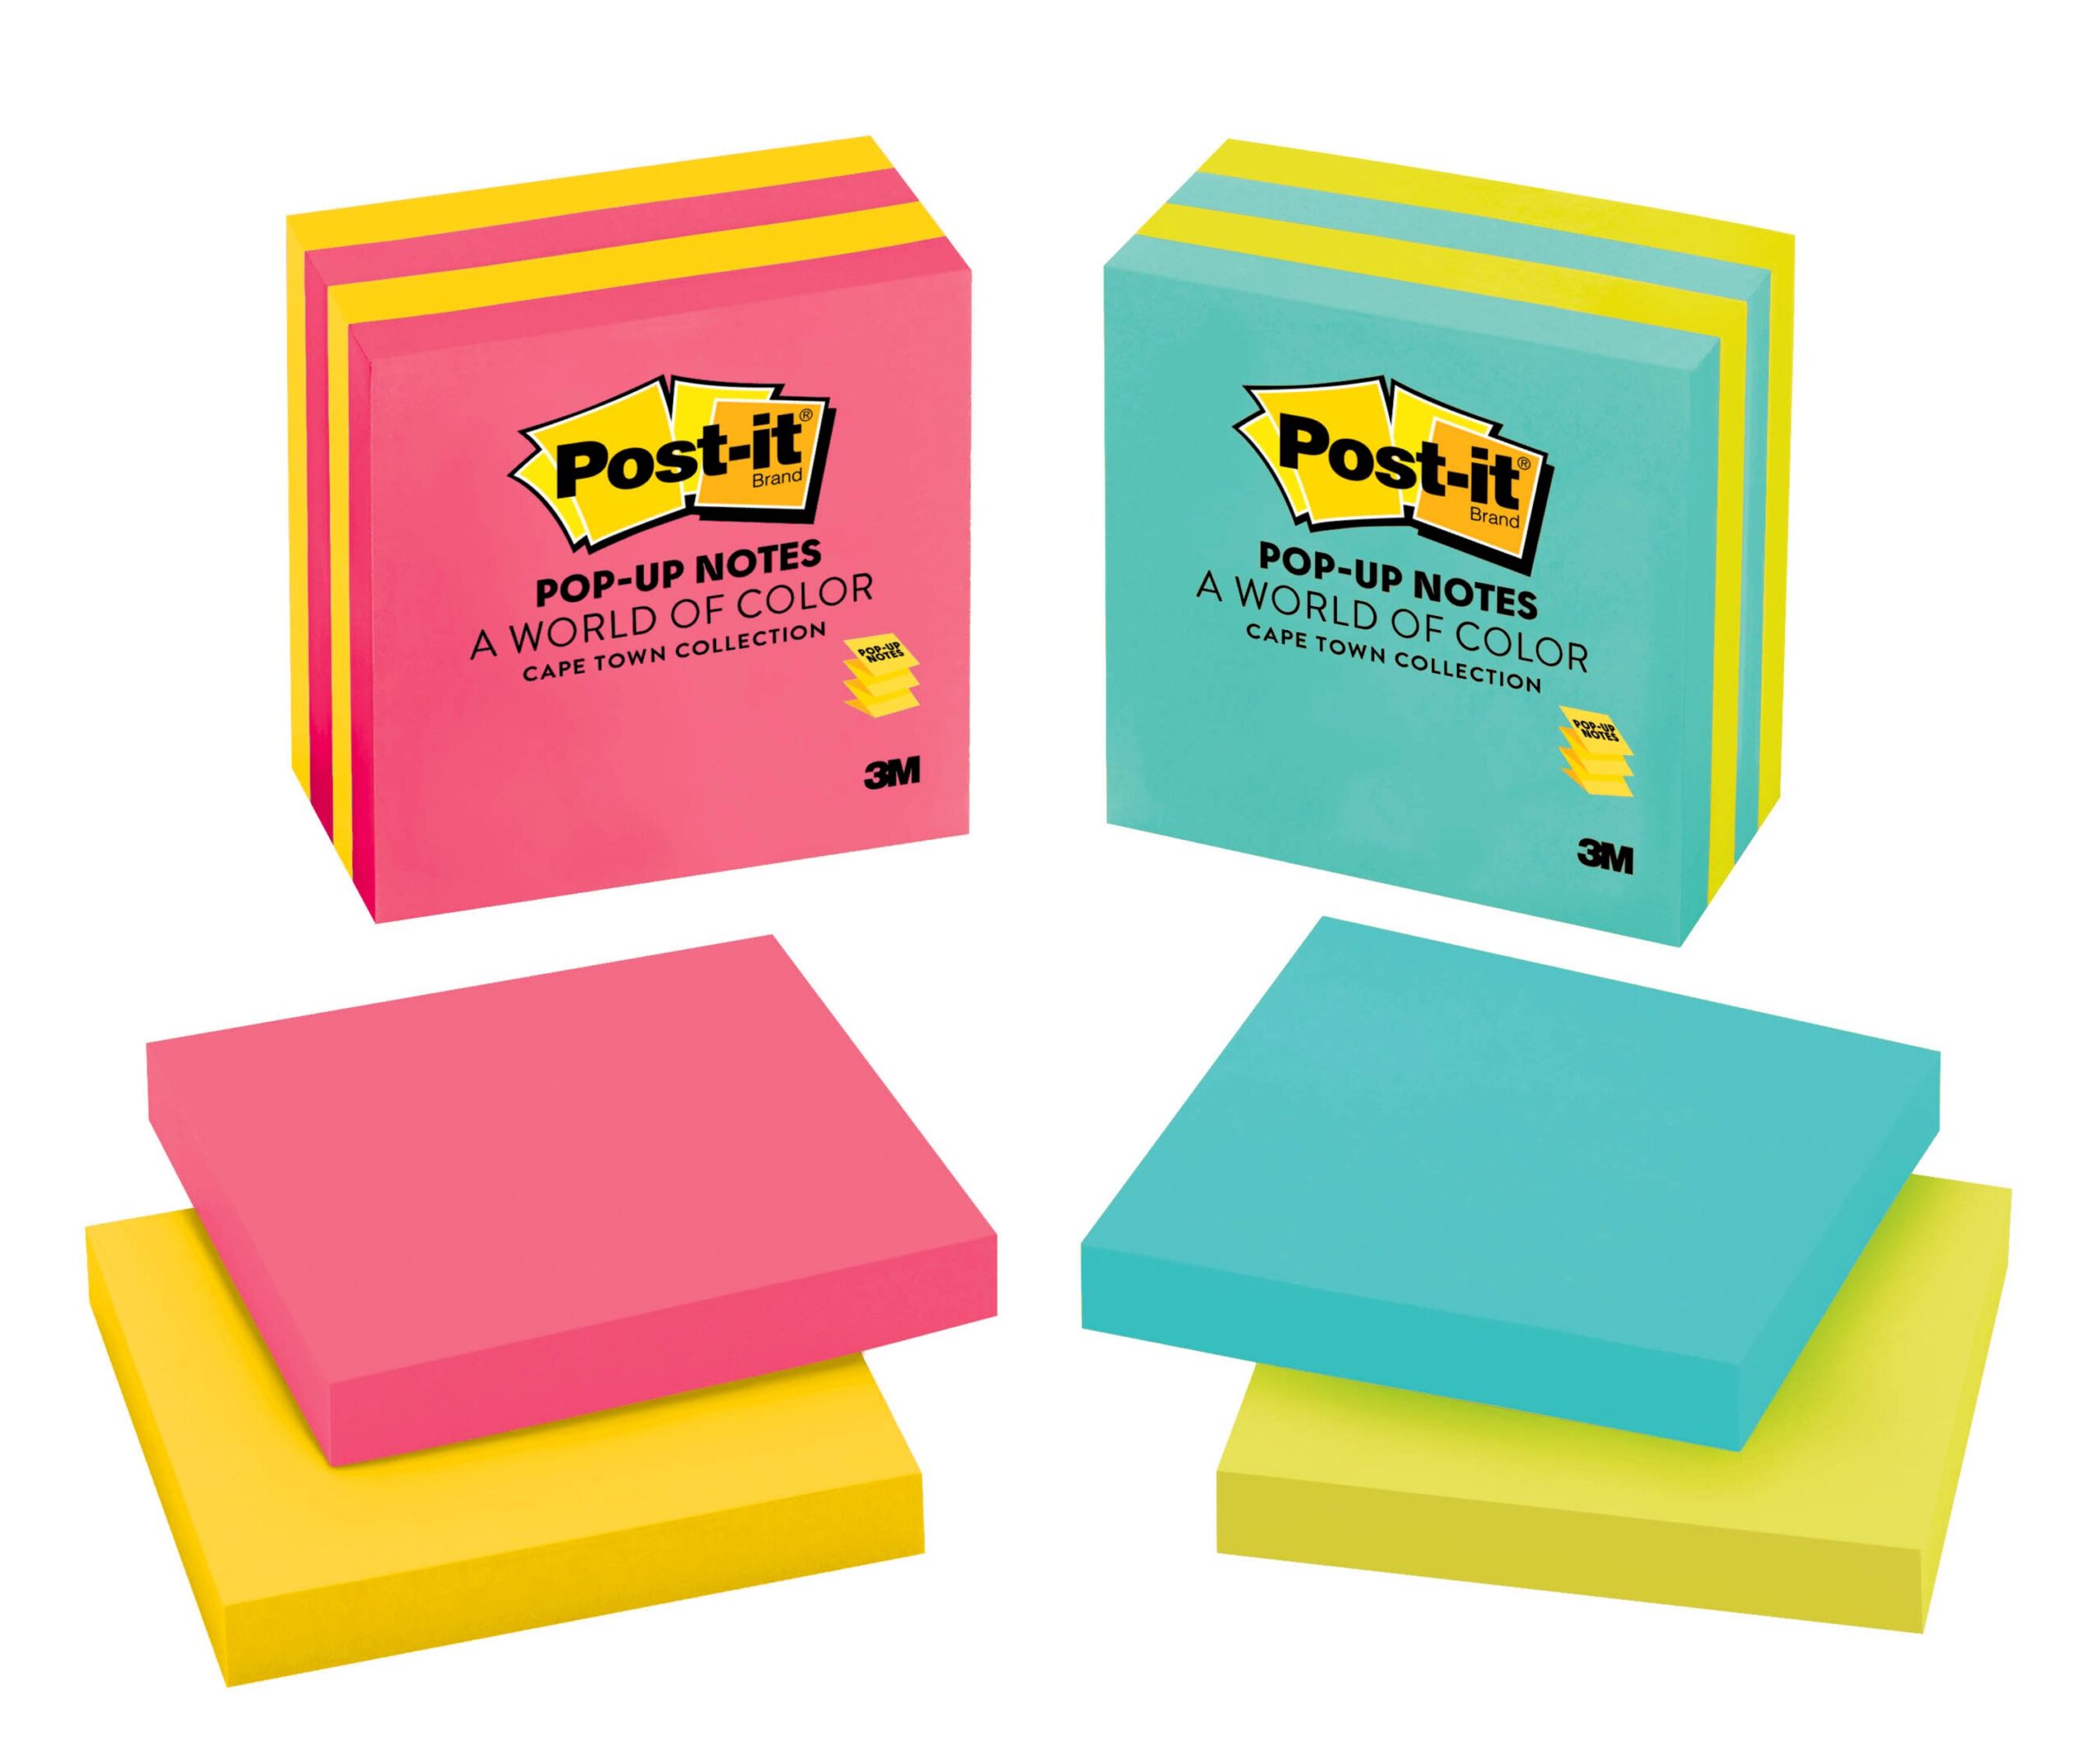 Post-it pop-up notes